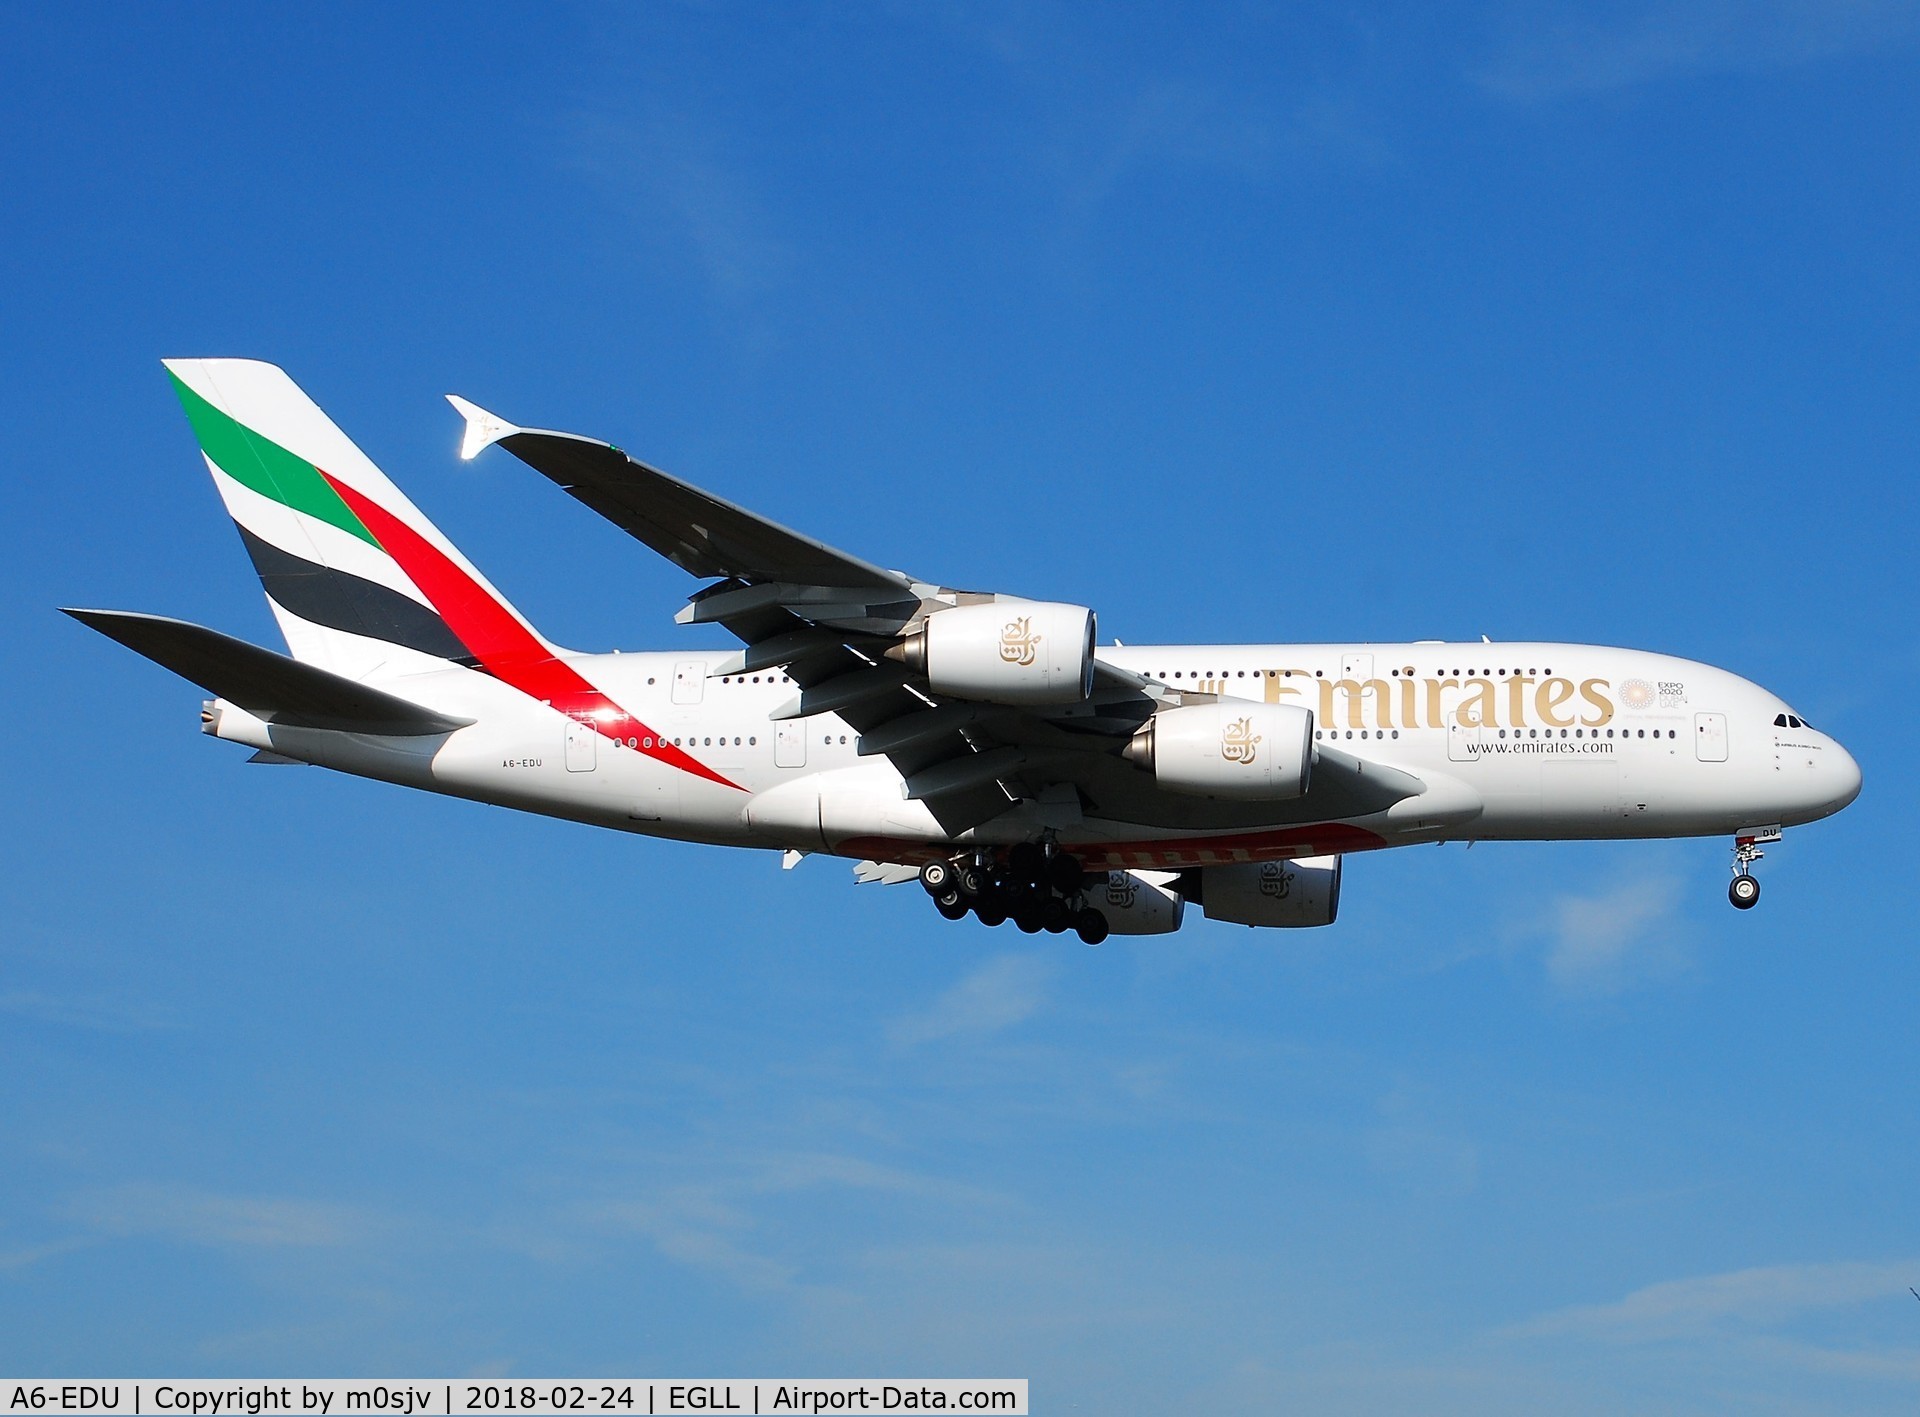 A6-EDU, 2011 Airbus A380-861 C/N 098, Taken from the threshold of 29